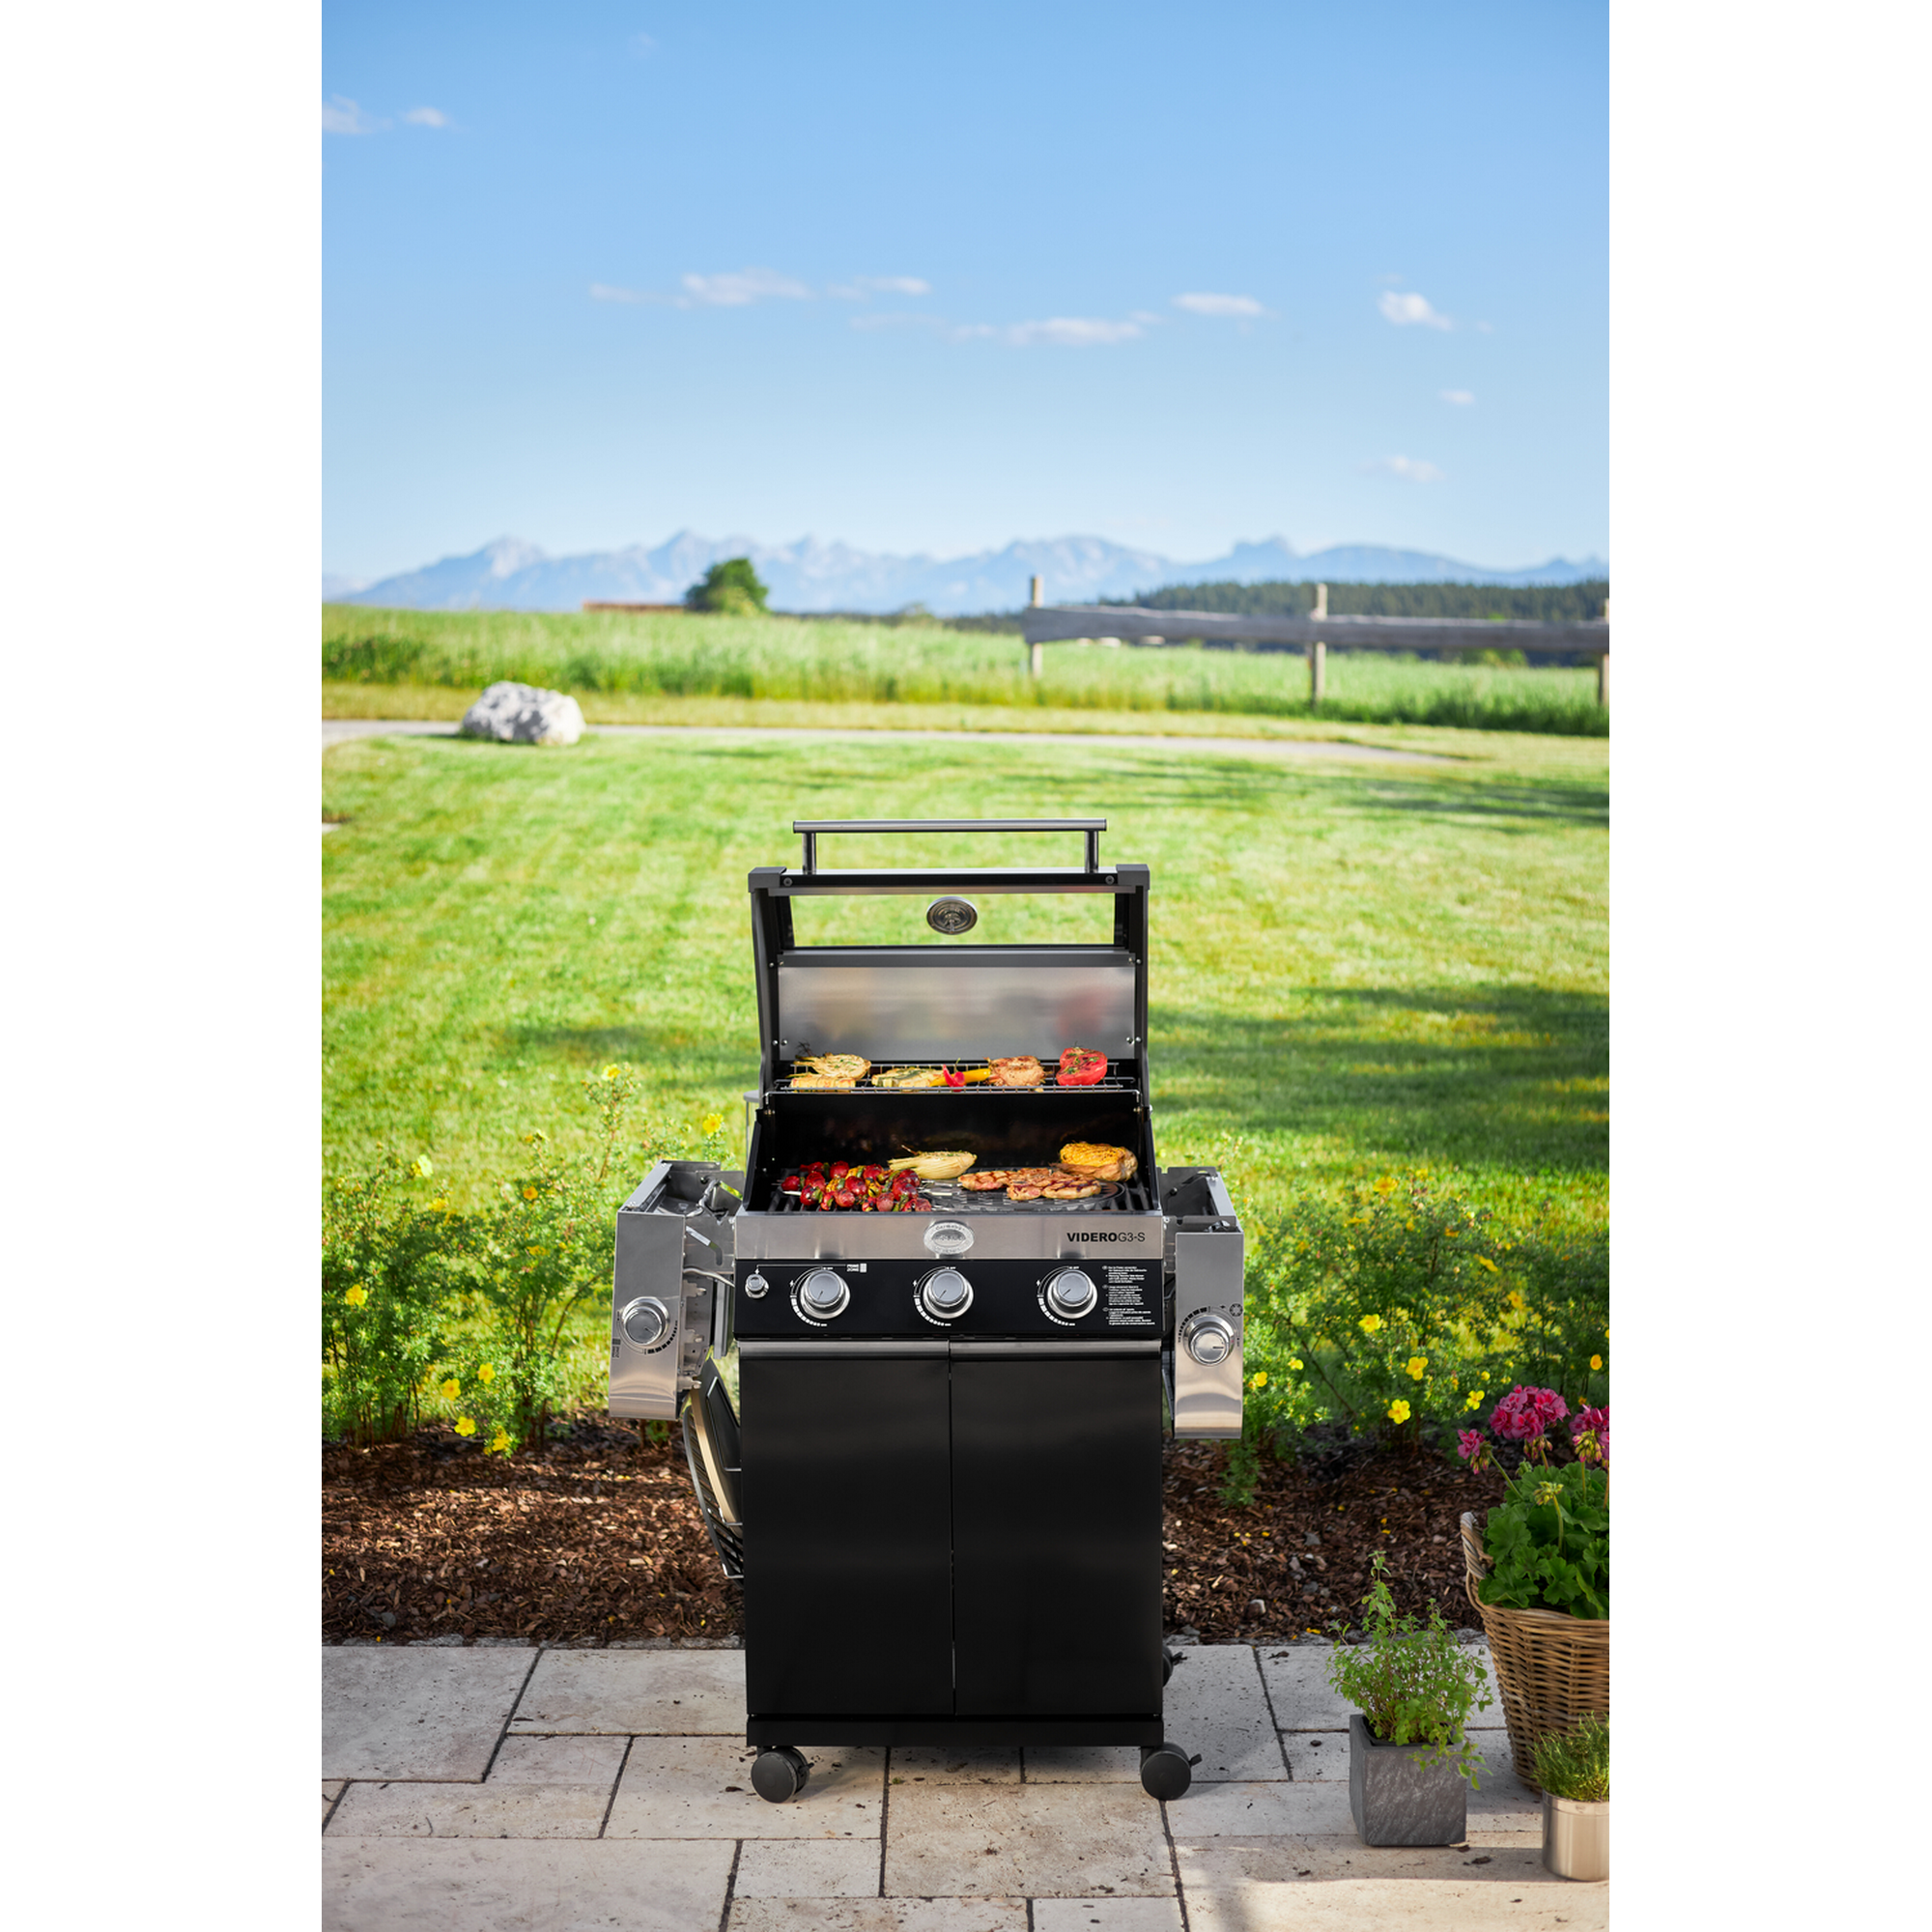 Gasgrill 'BBQ-Station Videro G3-S Vario+' schwarz + product picture